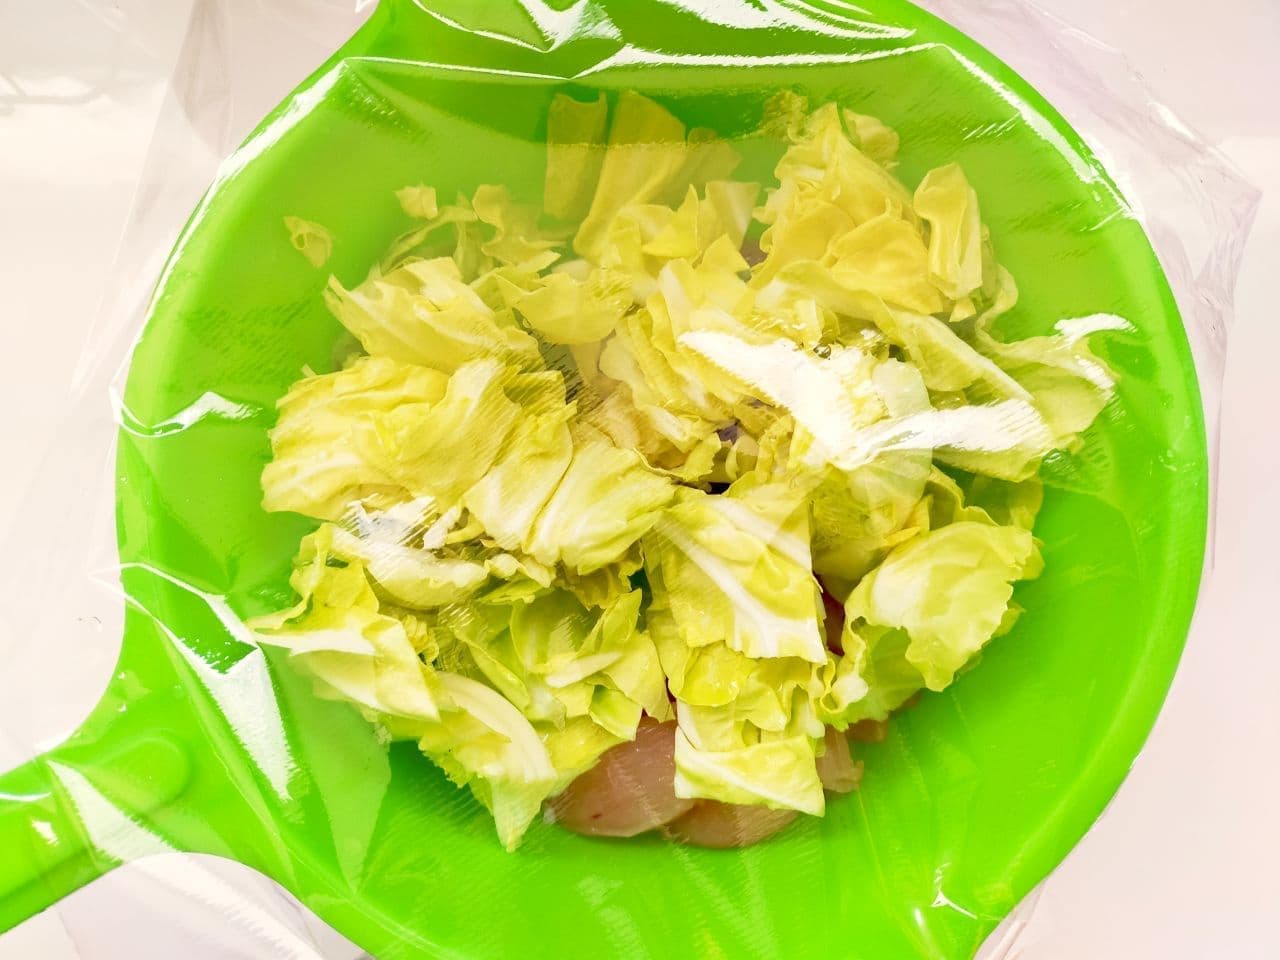 "Steamed scissors and cabbage in a microwave oven" recipe